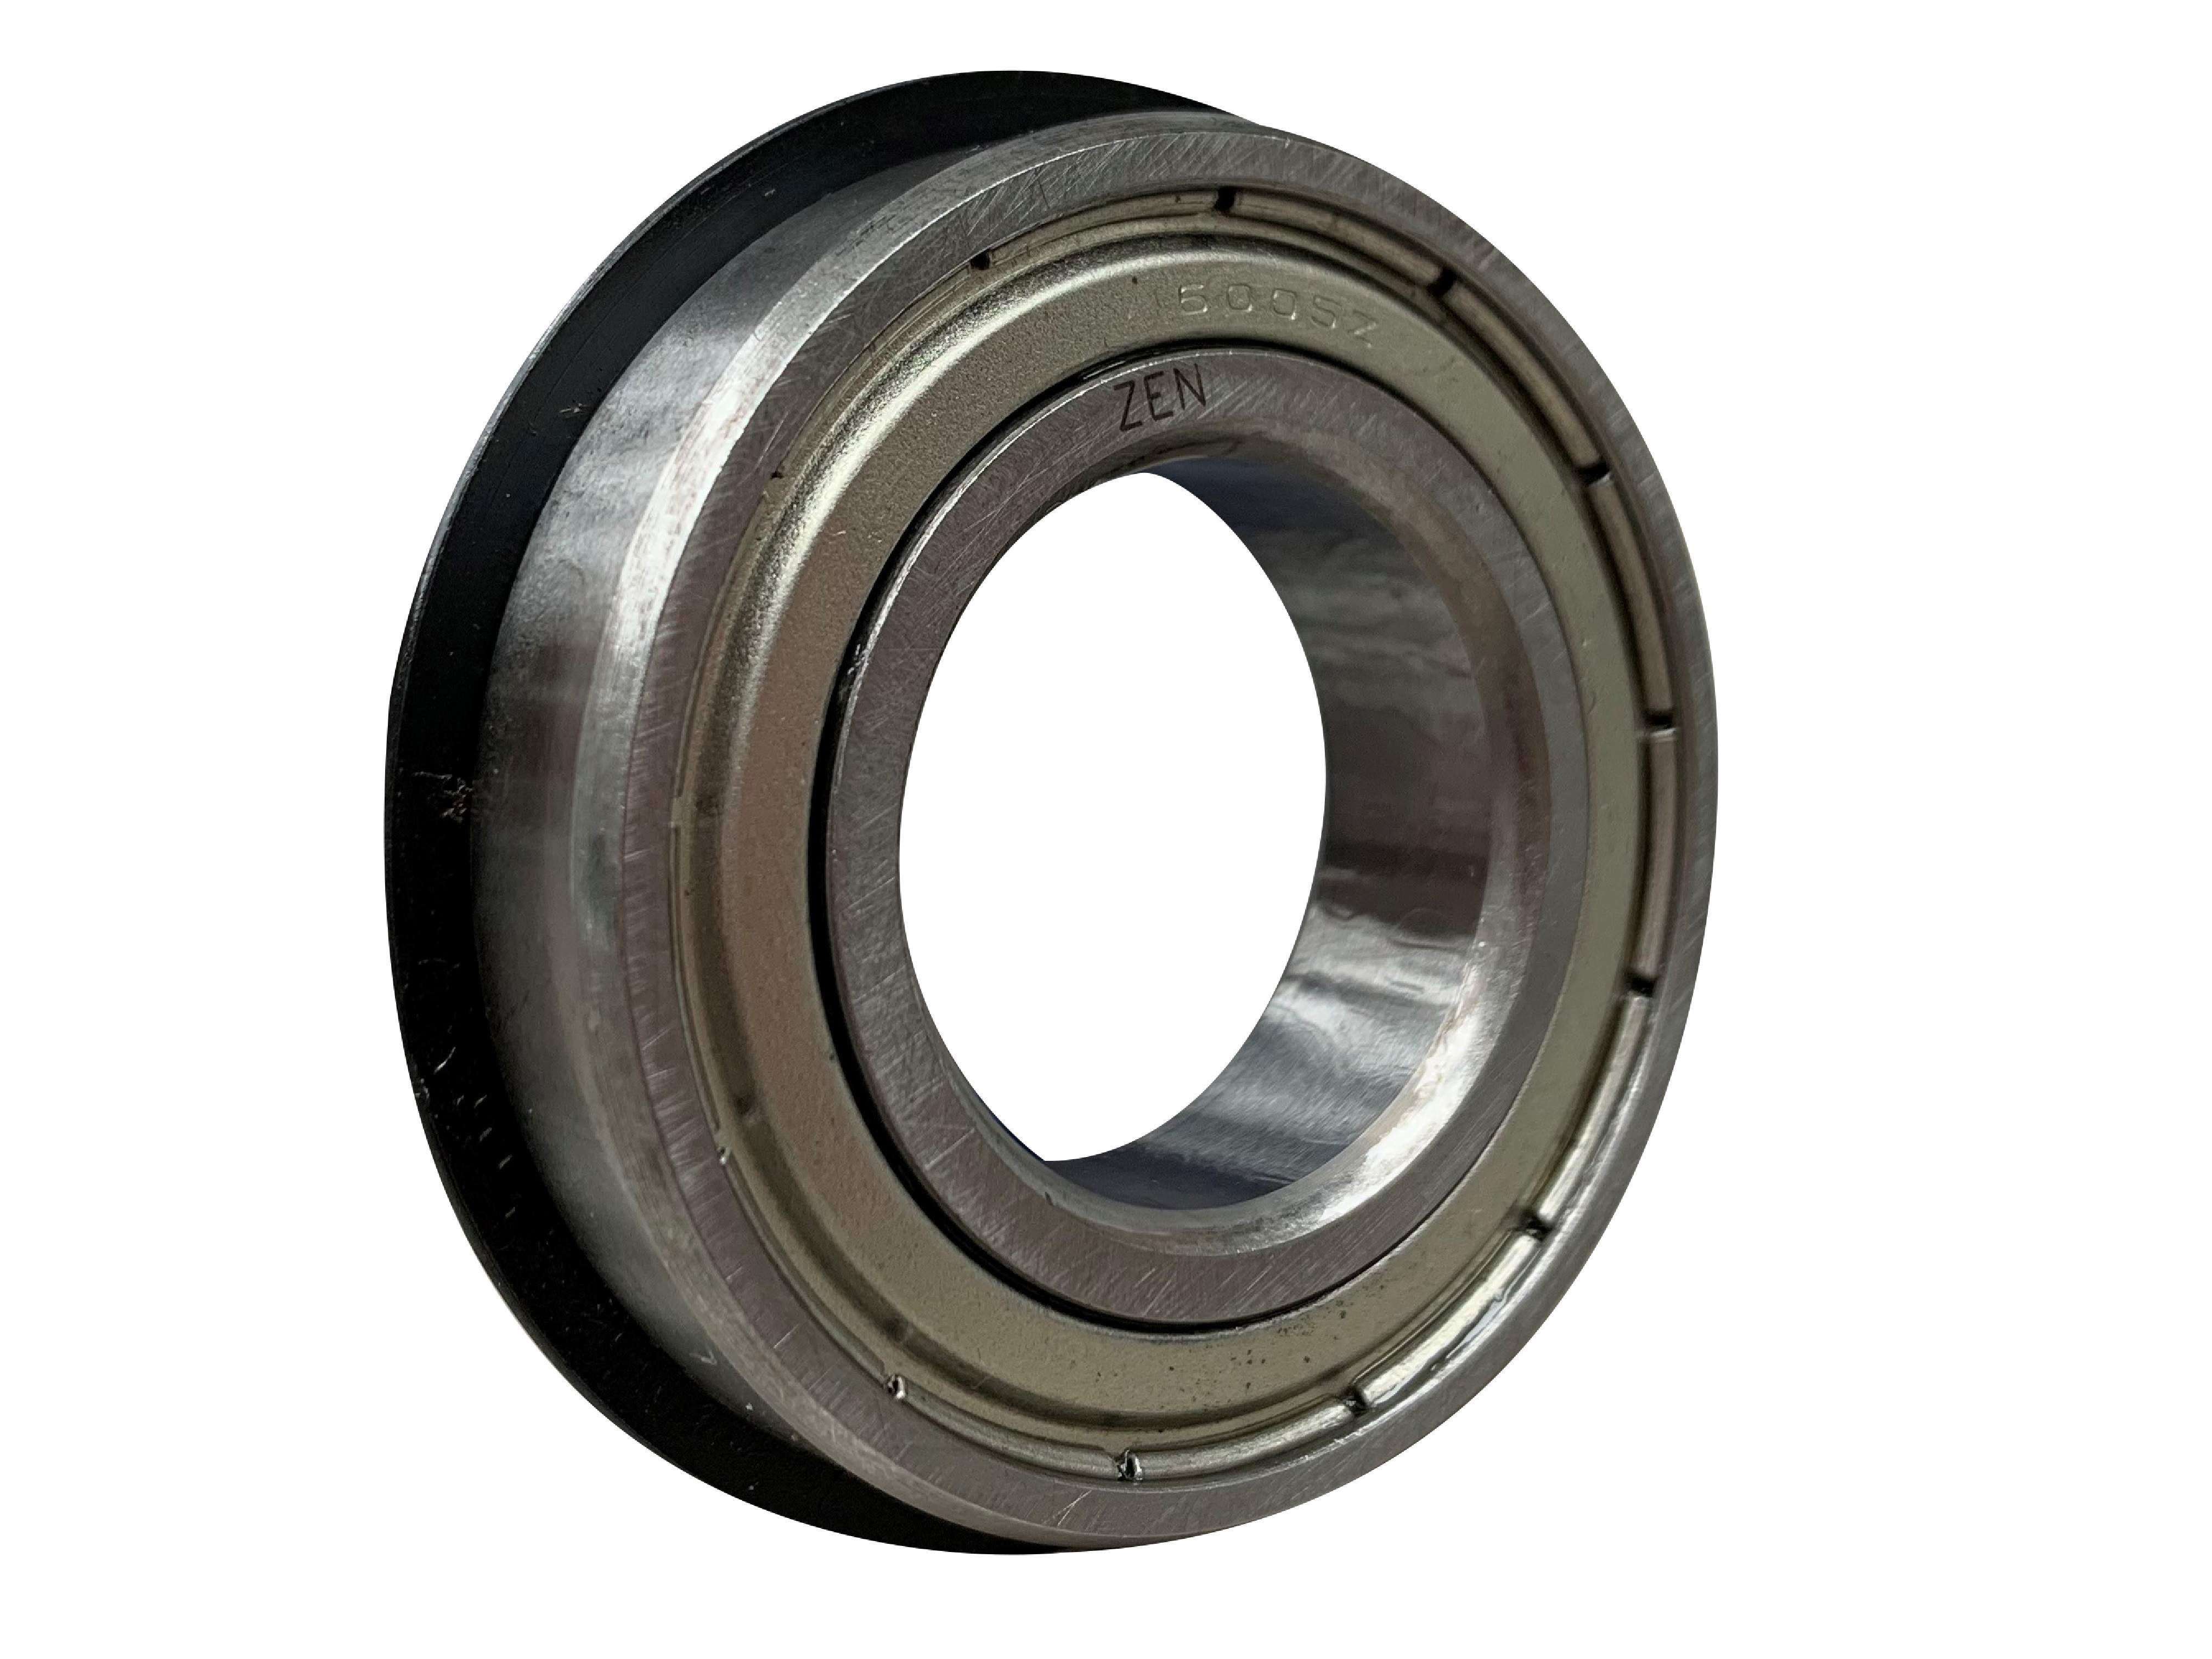 ZEN 6006-2Z-NR Shielded Ball Bearing With Snap Ring 30mm x 55mm x 13mm